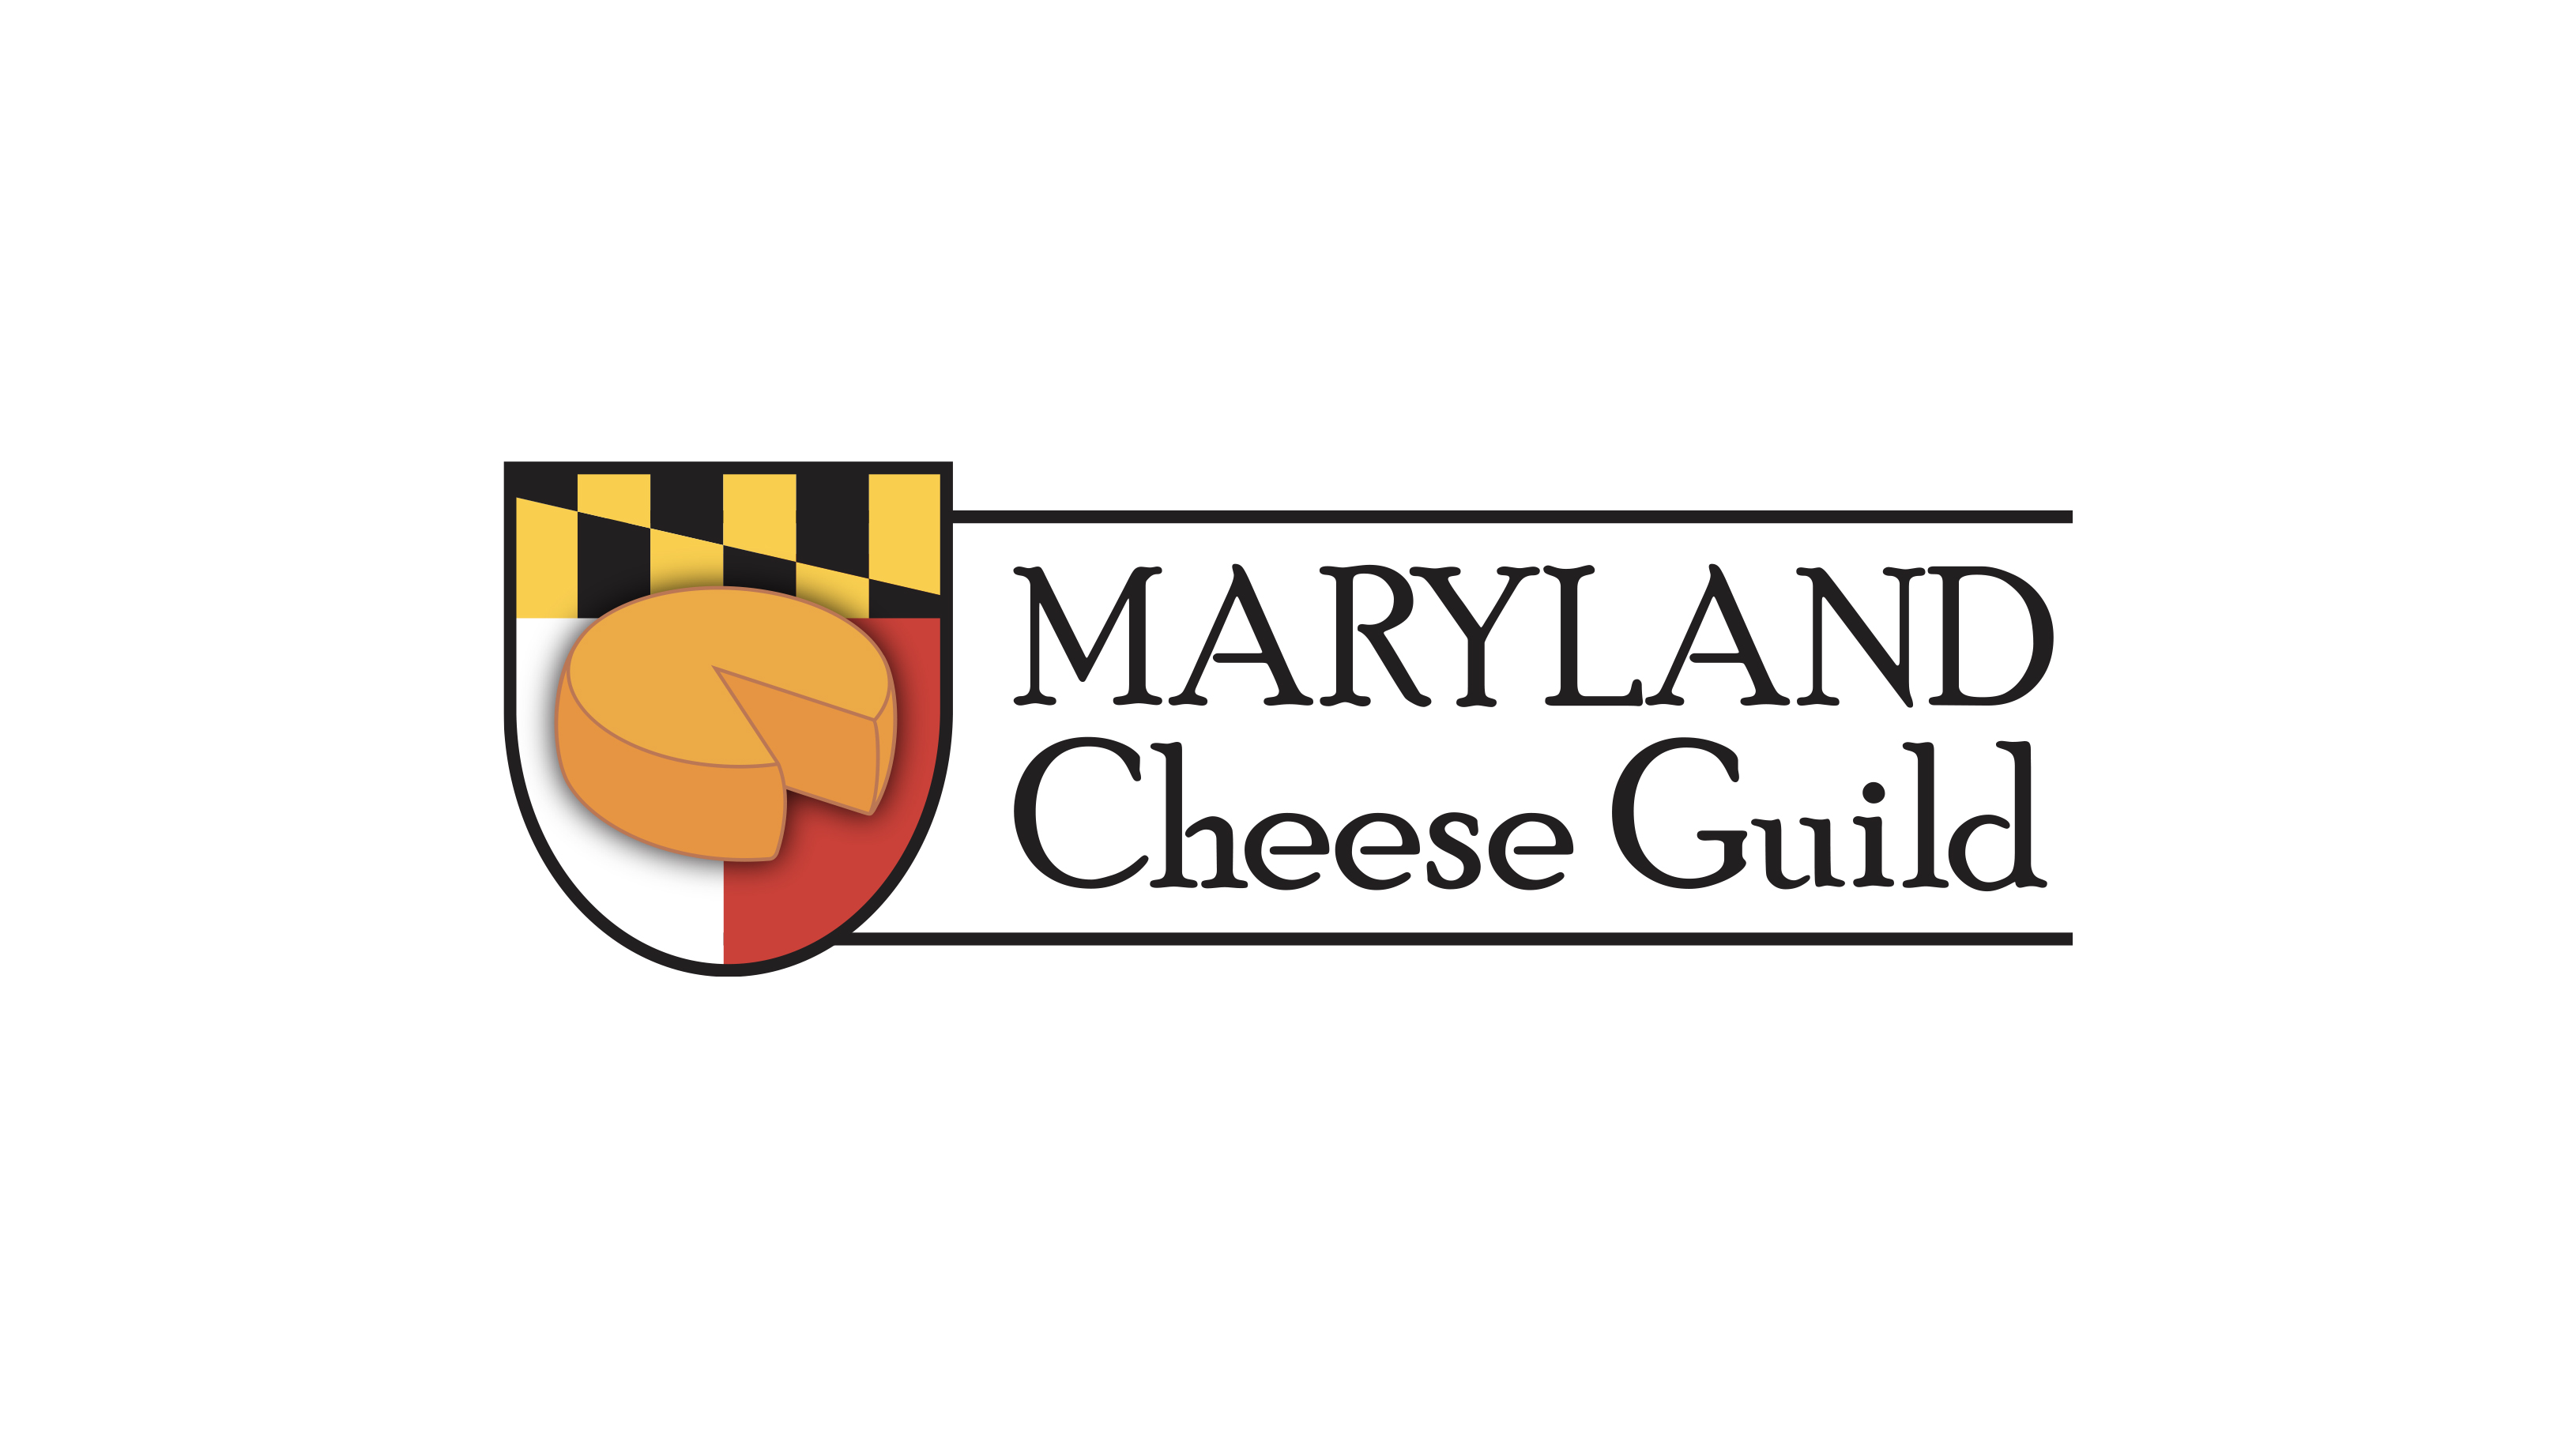 Maryland Cheese Guild logo